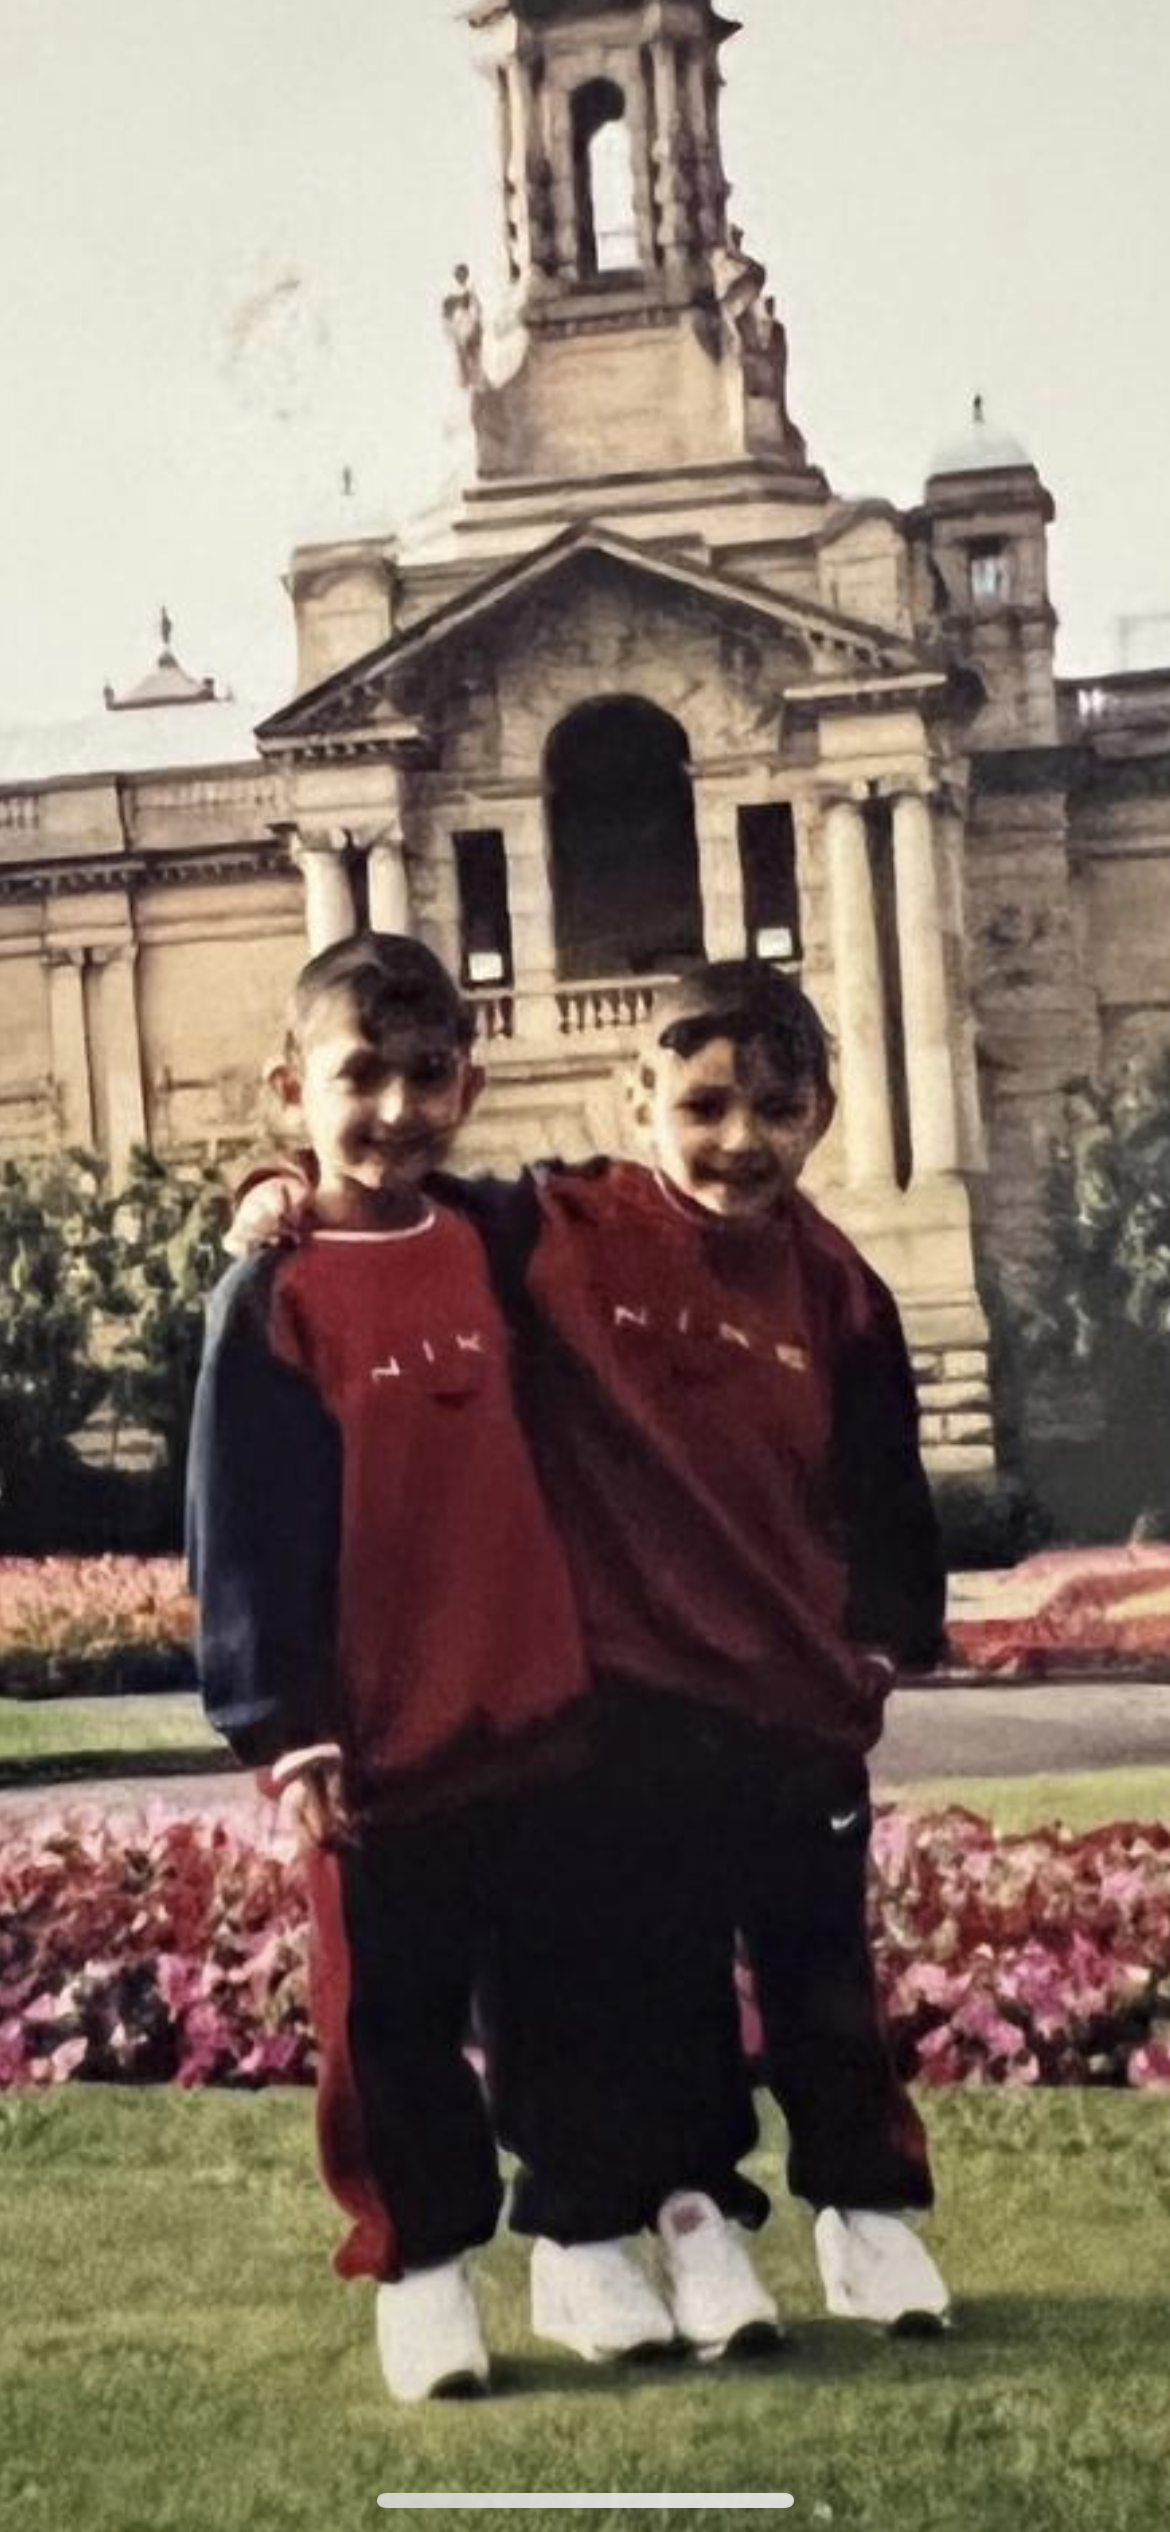 Bradford Telegraph and Argus: Sohail Ali (Left) with his younger brother Bilal Ali